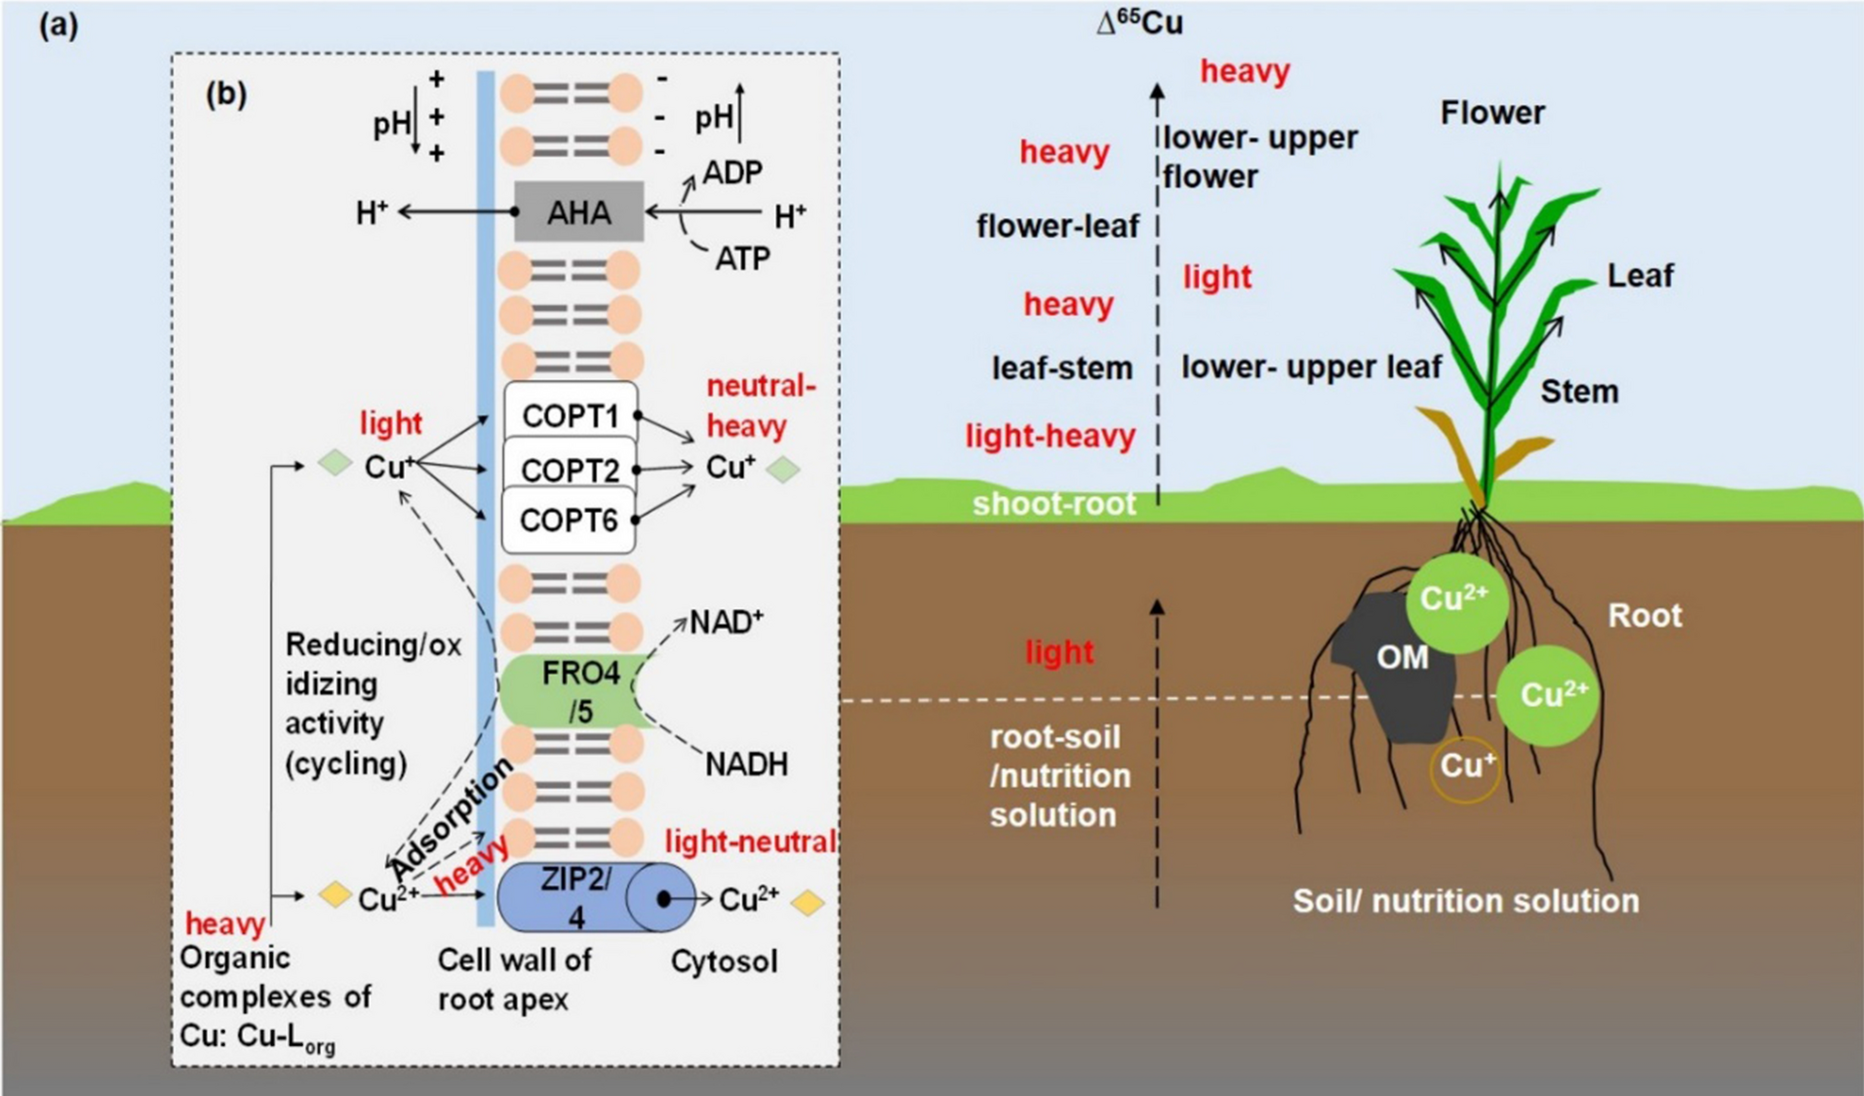 Biogeochemical cycle and isotope fractionation of copper in plant–soil systems: a review